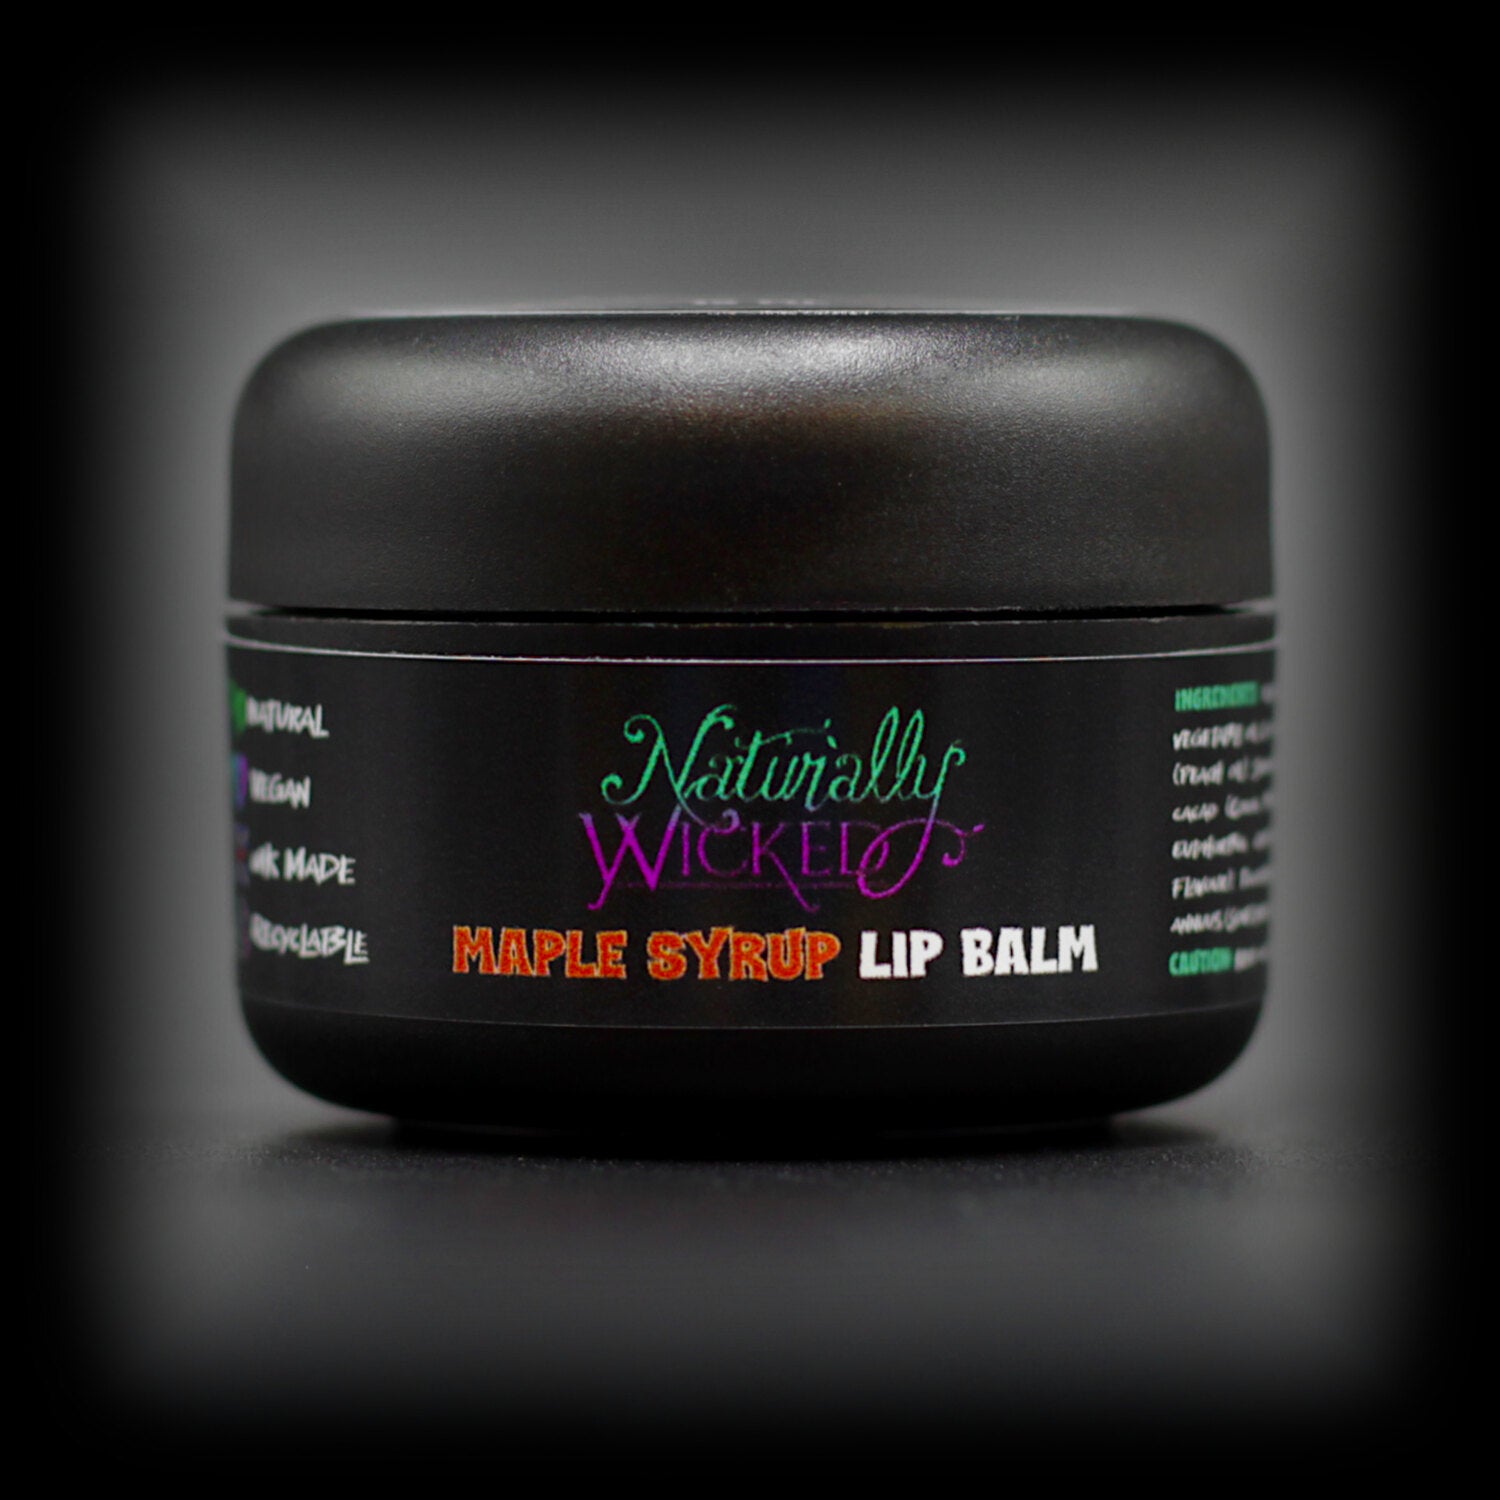 Naturally Wicked Maple Syrup Lip Balm In Compact Luxury Black Container